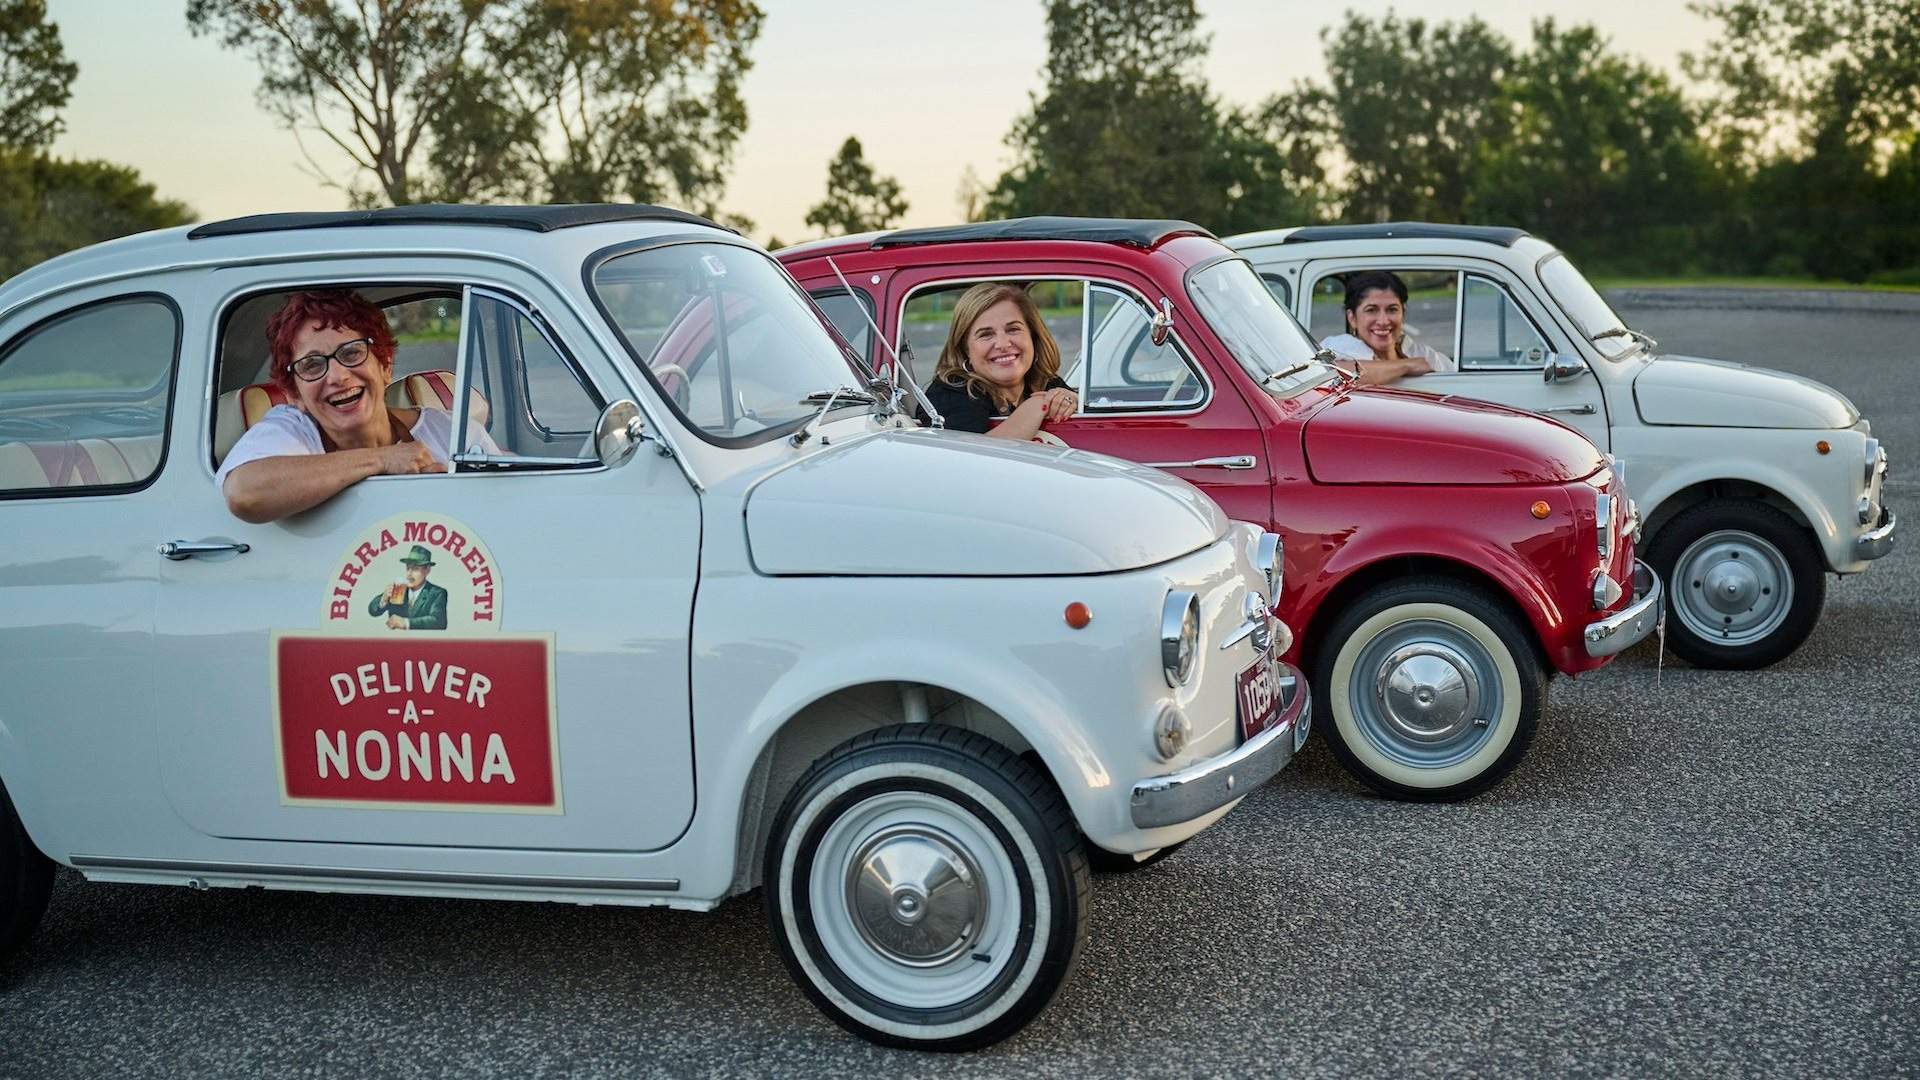 Melbourne, Get Ready for Nonna: Birra Moretti's 'Deliver-a-Nonna' Brings Italian Feasts to Your Front Door